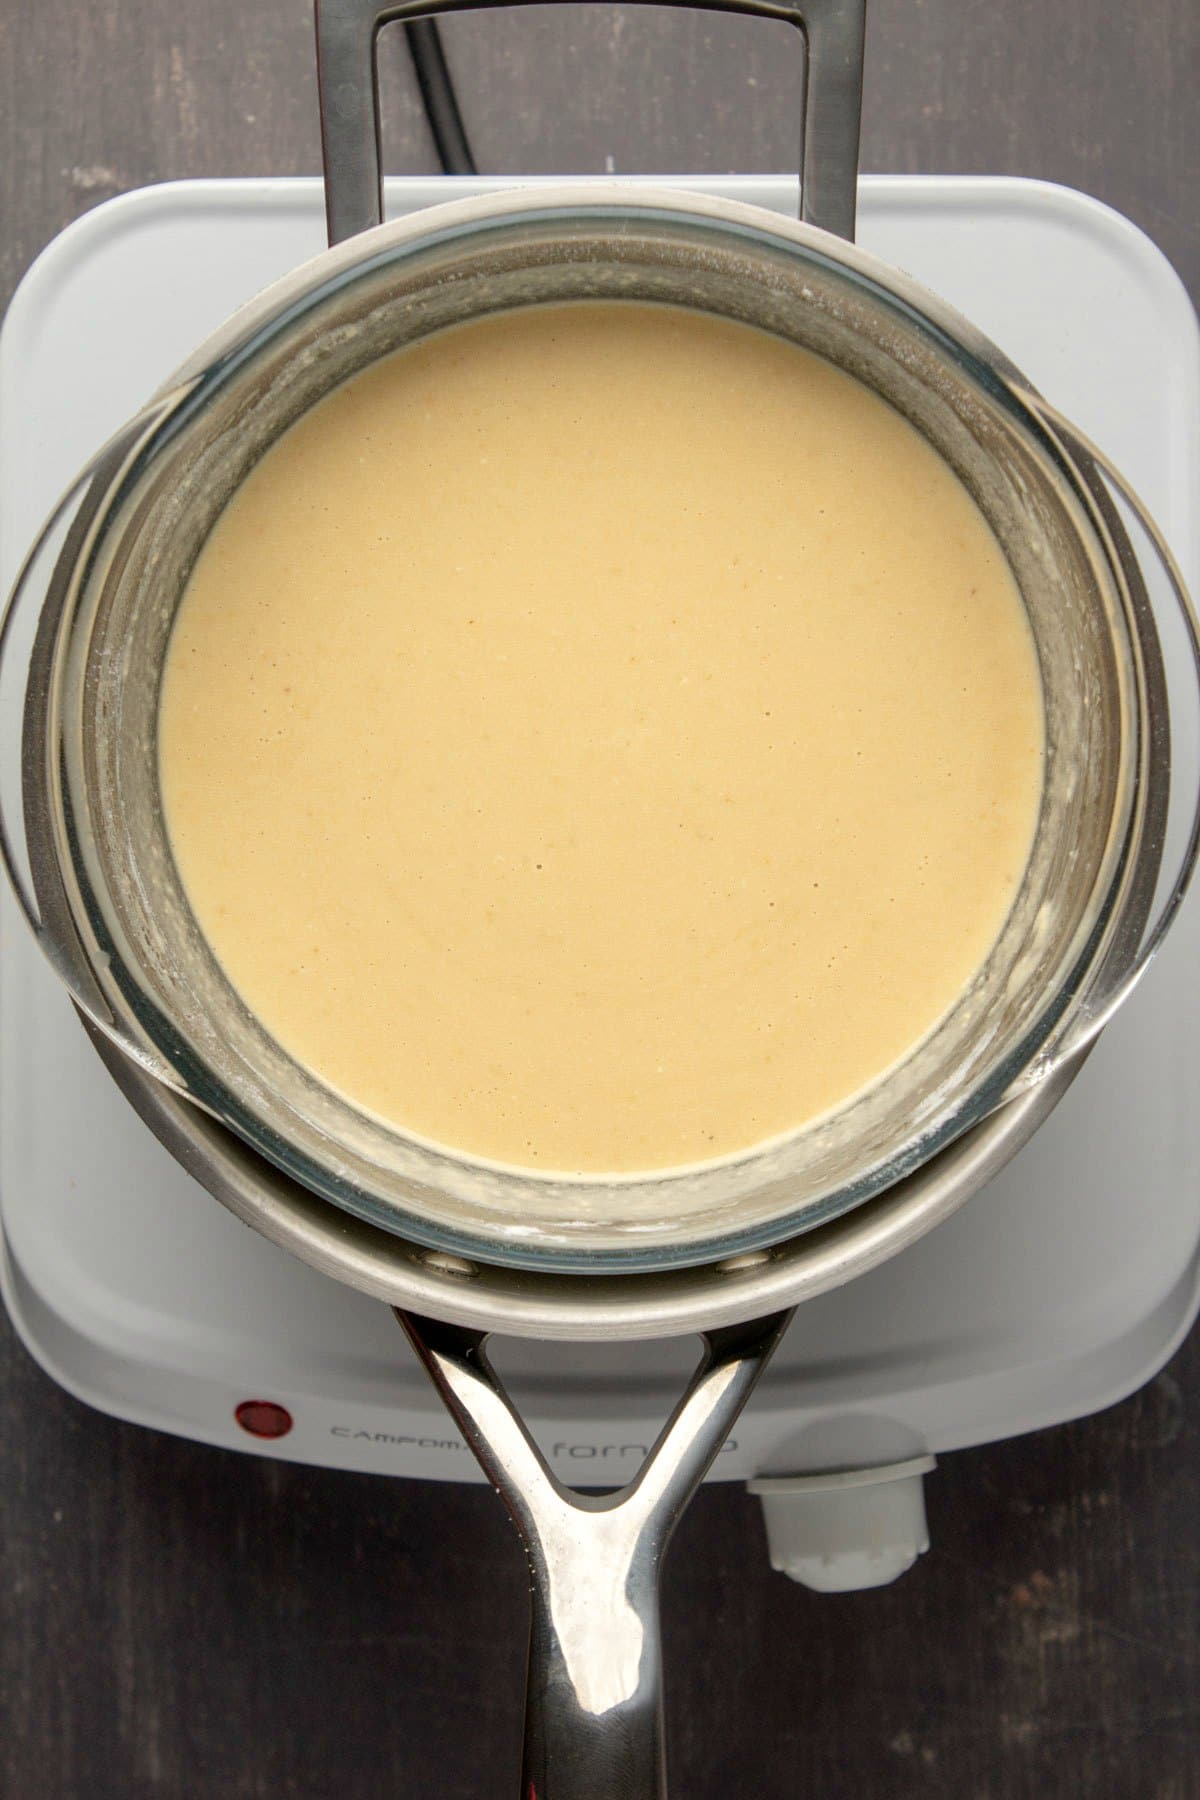 Vegan white chocolate mixture in a homemade double boiler.